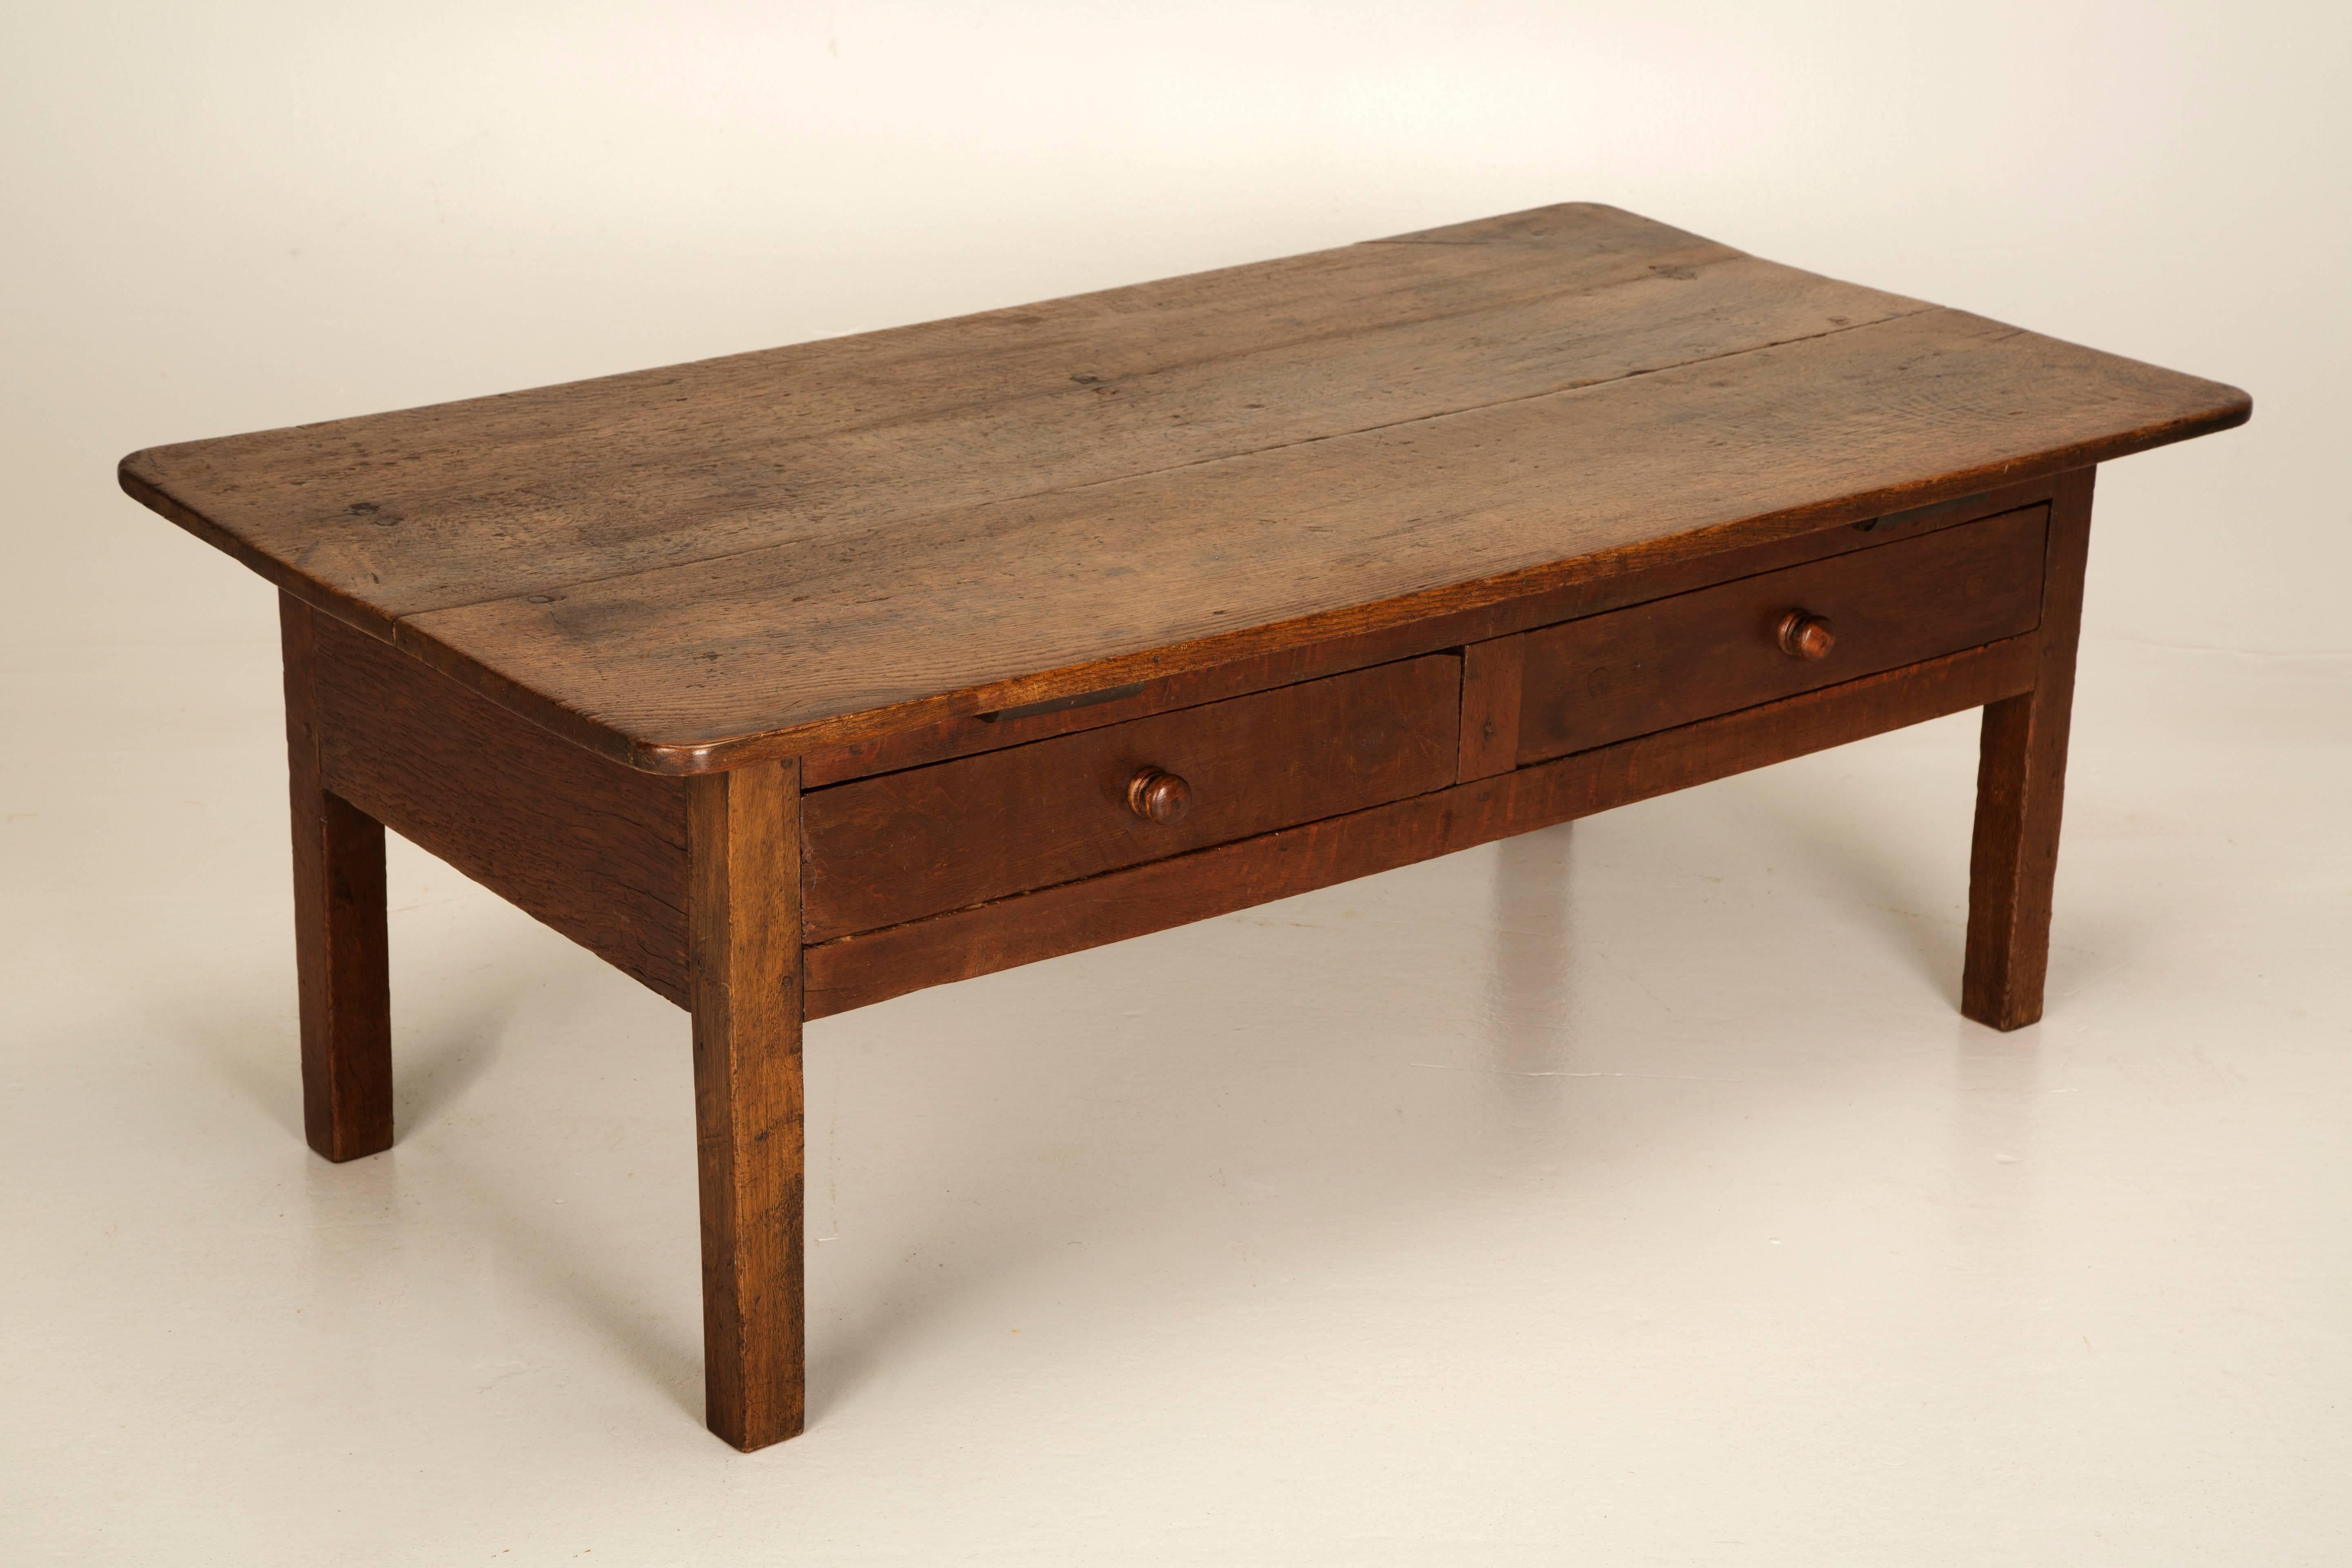 Late 19th Century Antique English Oak Coffee or Cocktail Table